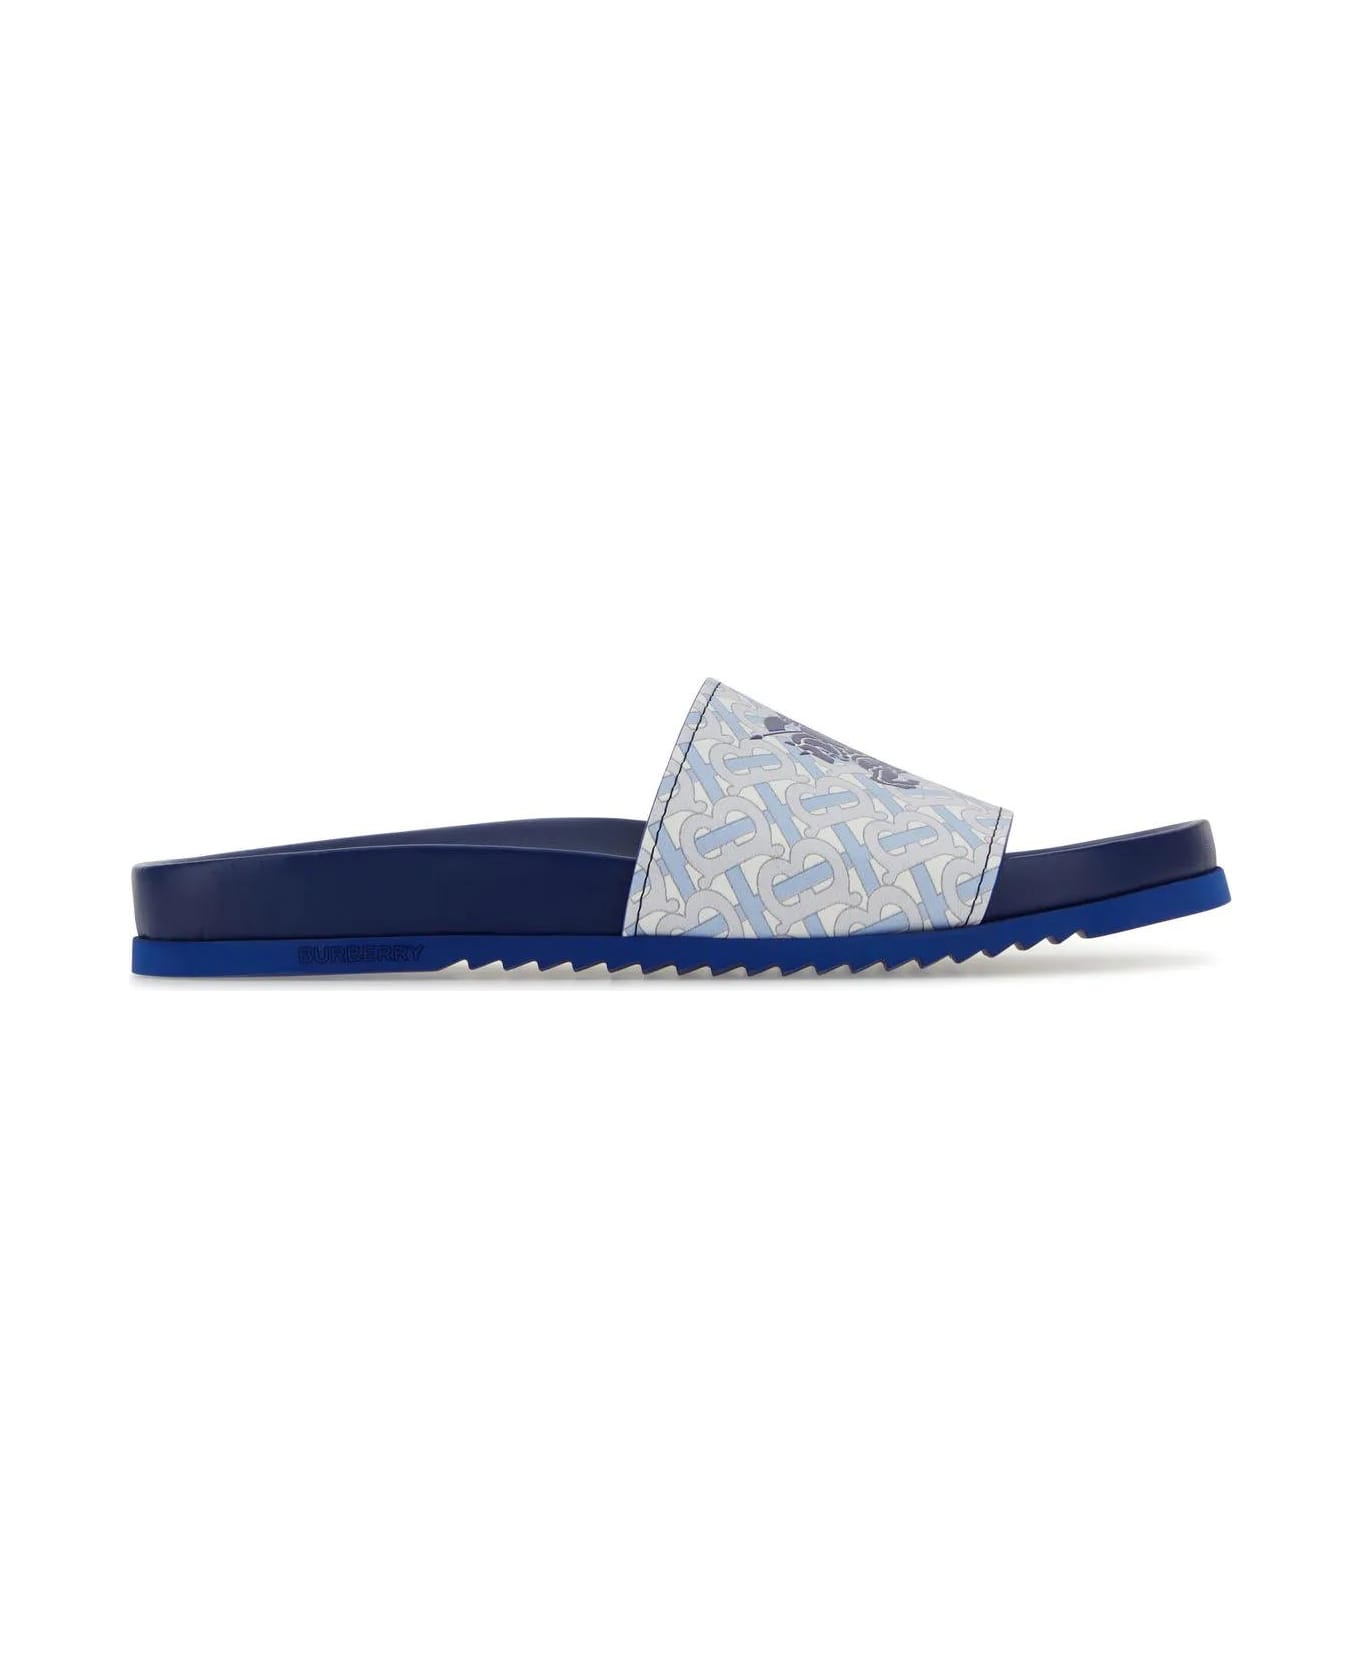 Burberry Printed Leather Slippers - Blue